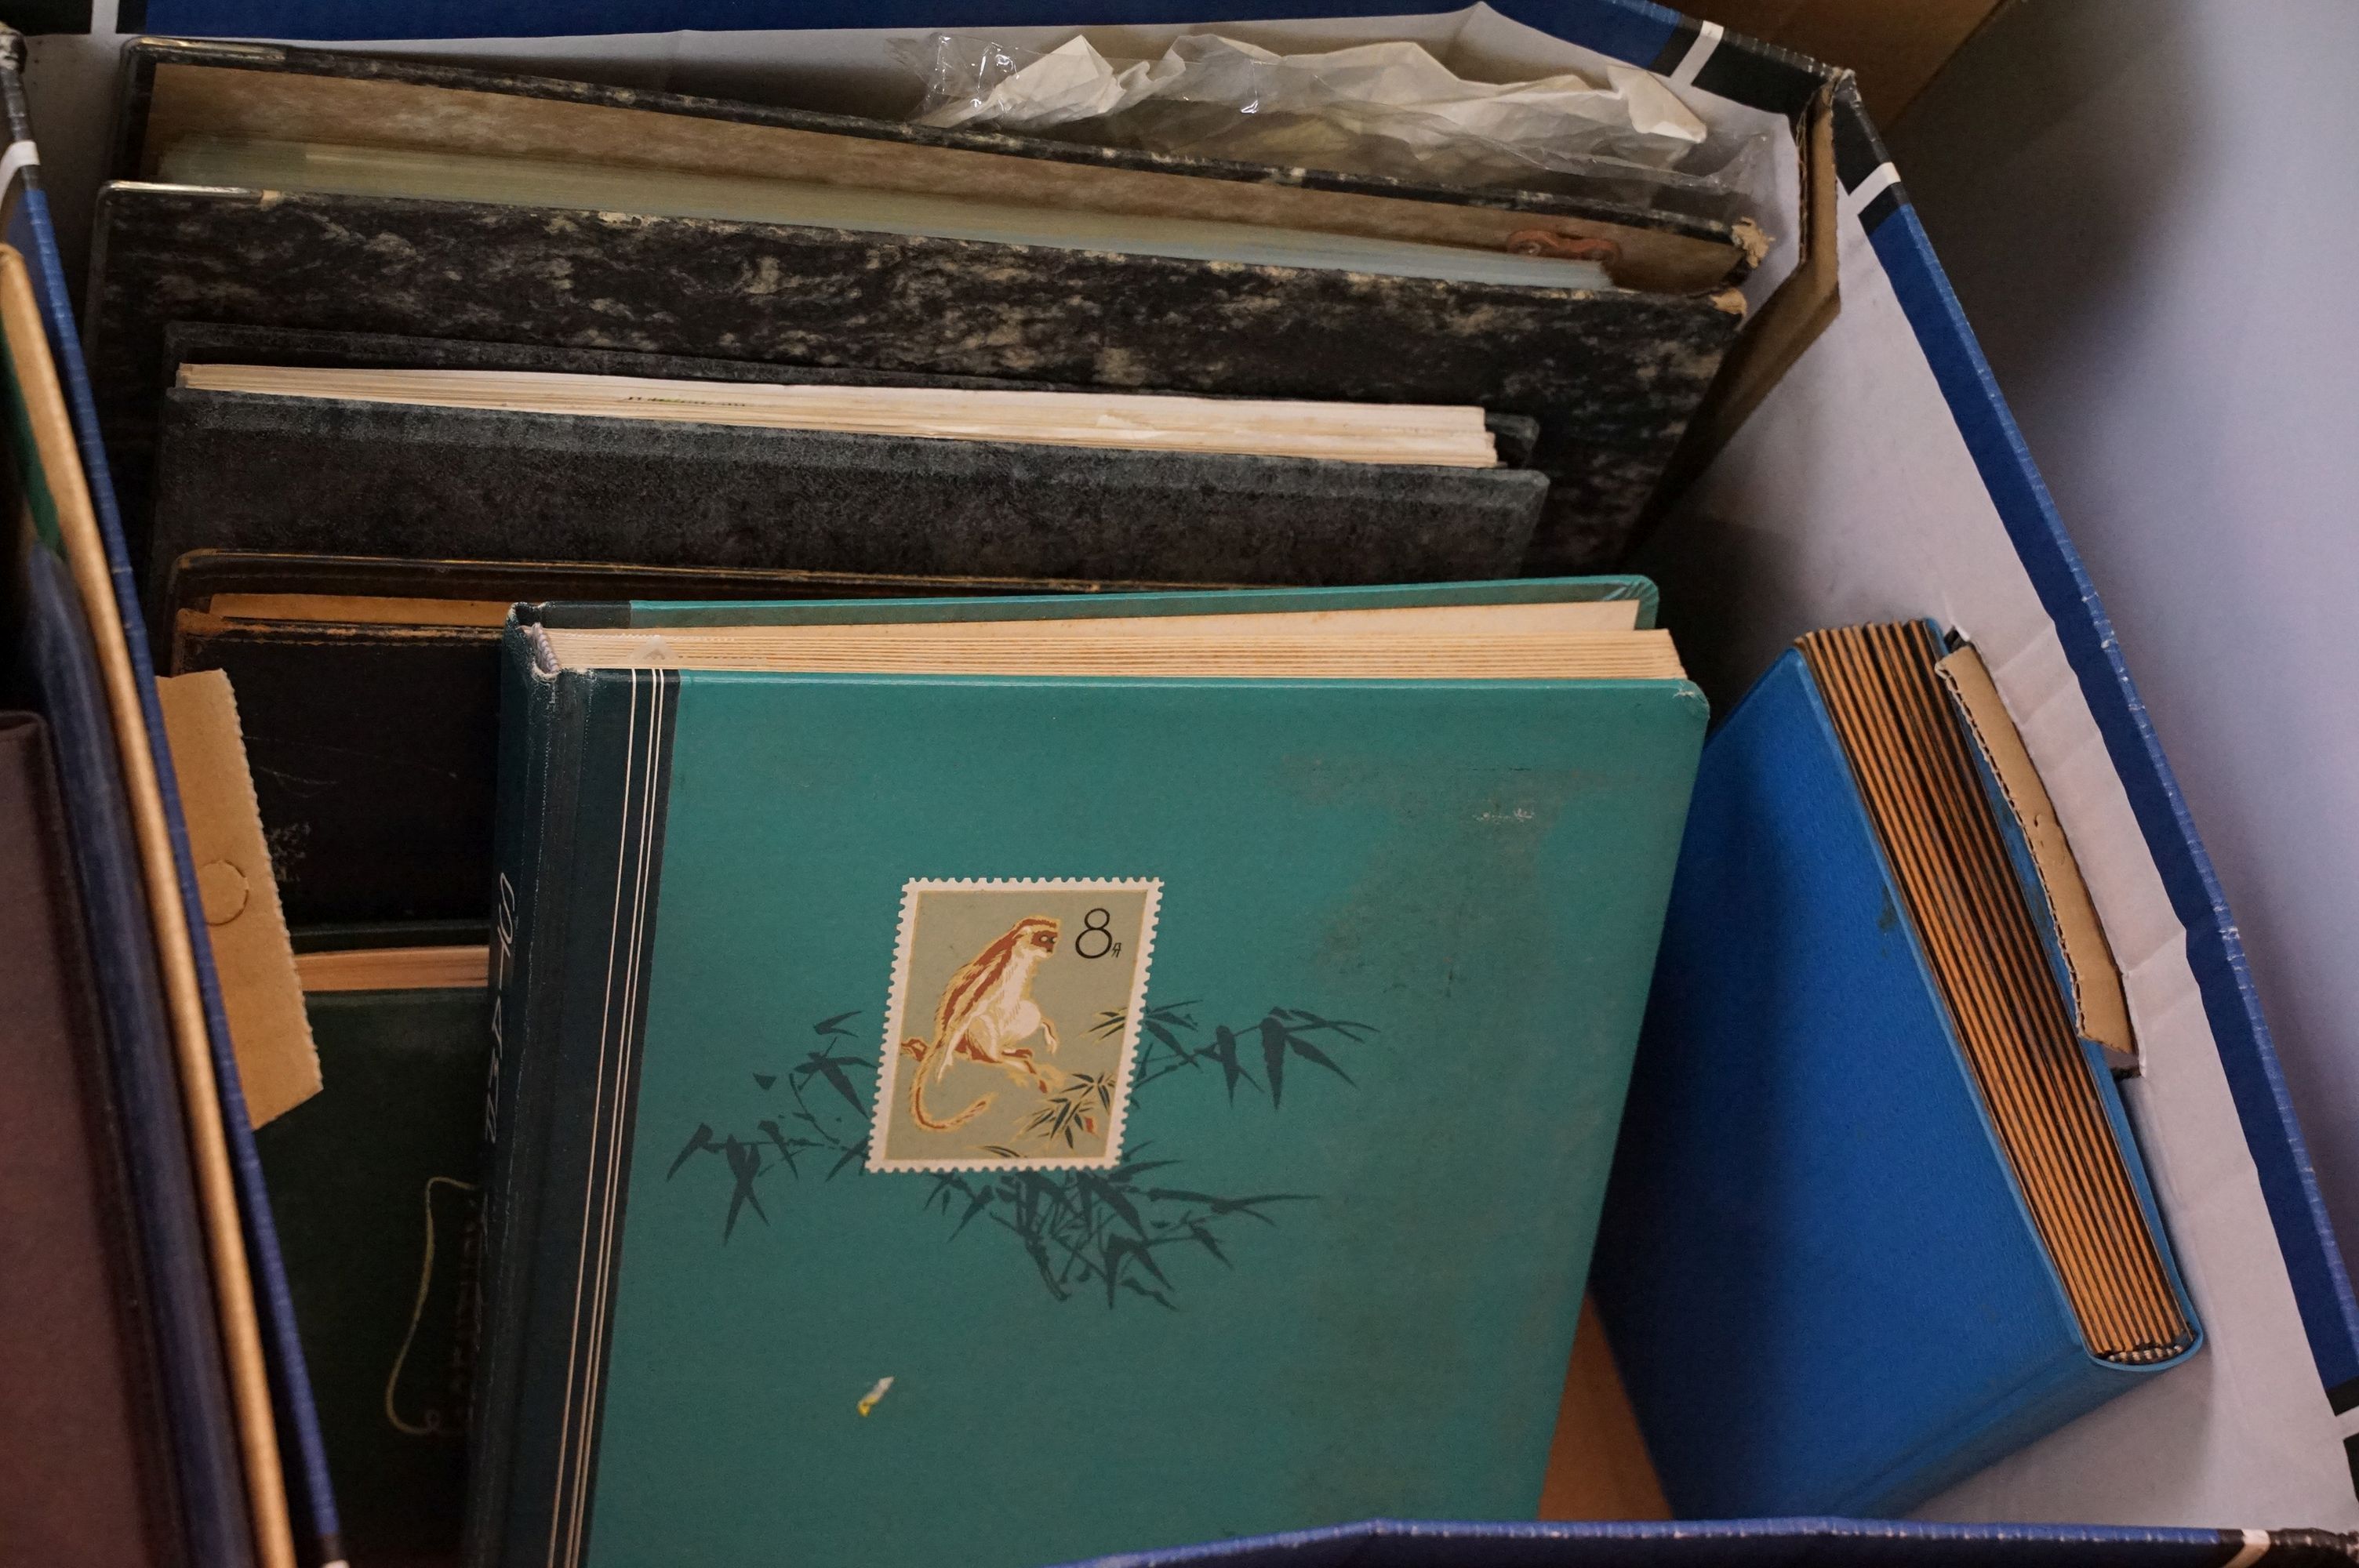 Collection of British & world stamps, together with a collection of empty stamp albums / stockbooks. - Image 8 of 12